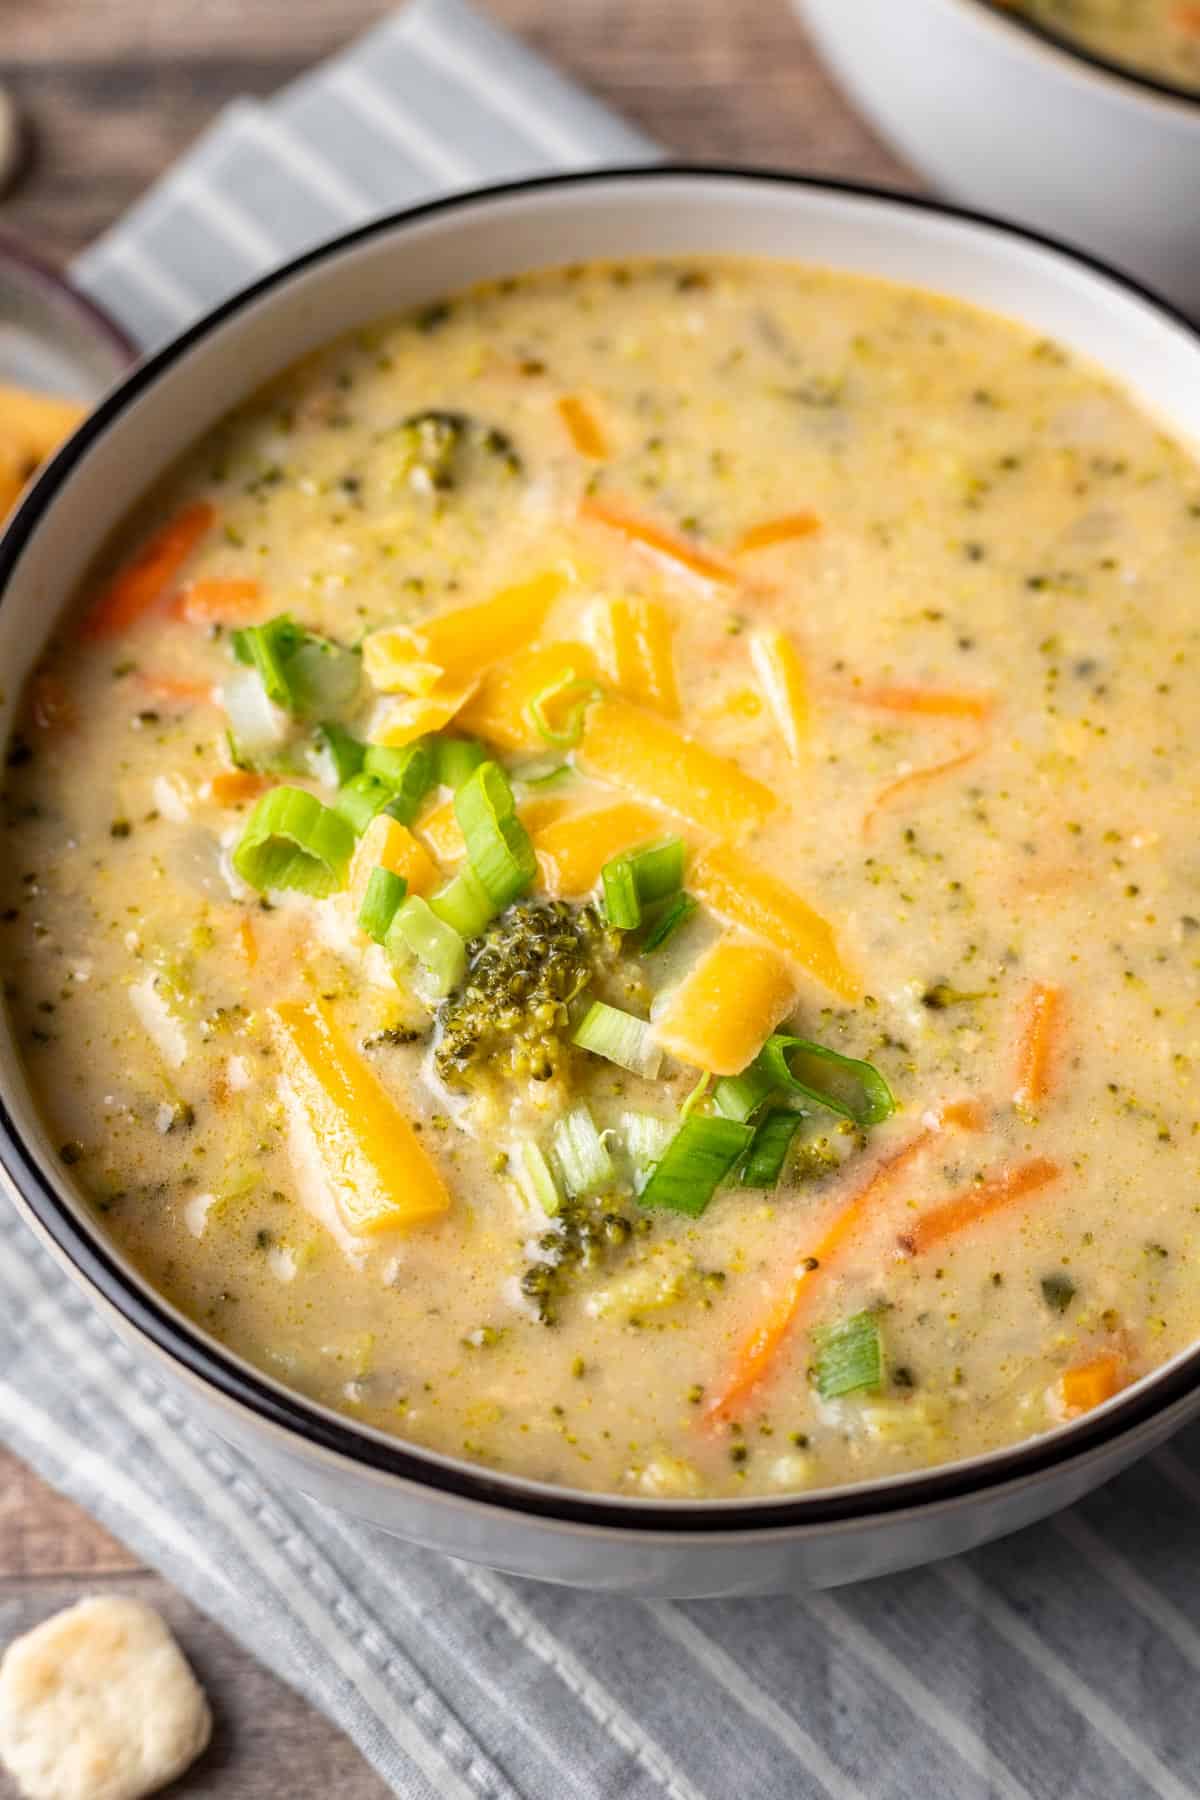 Instant pot broccoli cheddar soup garnished with shredded cheese and green onions.